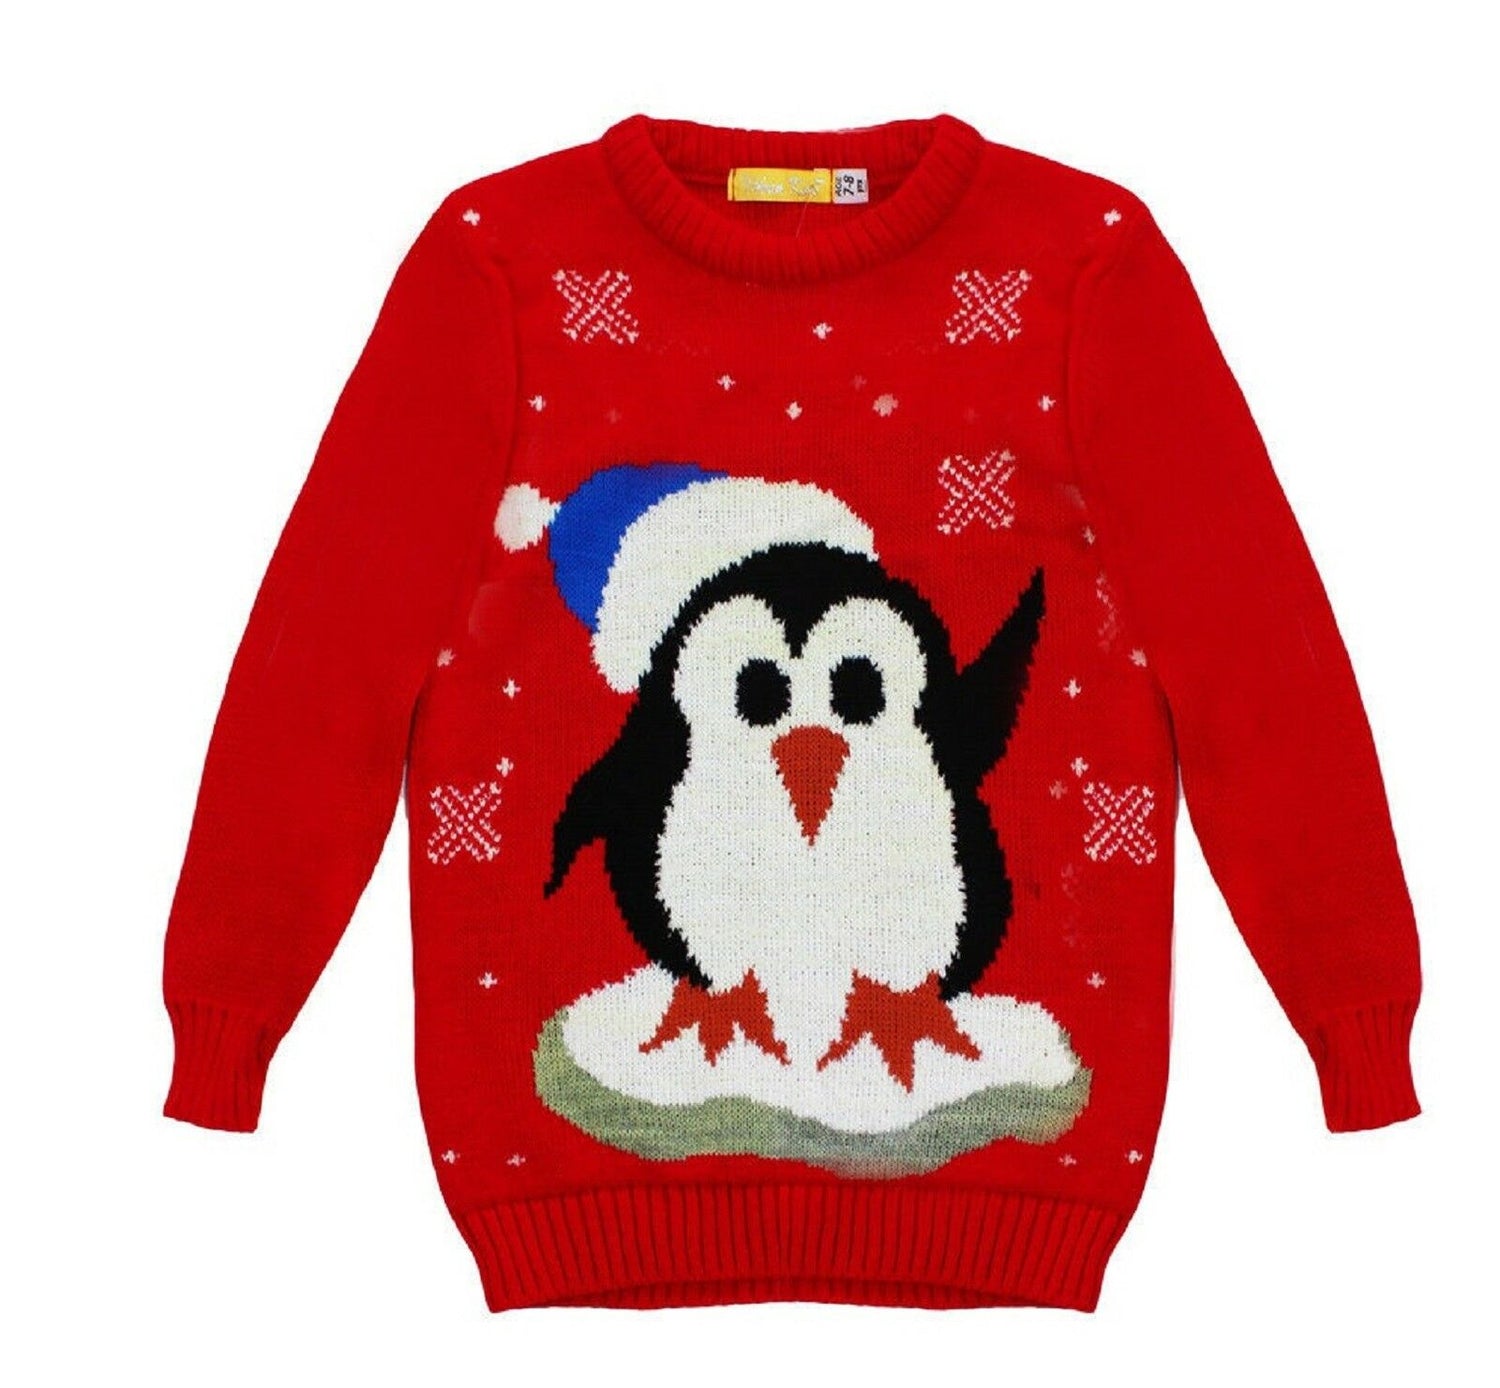 Children's Red Christmas Jumper With Penguin Wearing Santa Hat. Ages 3-14.